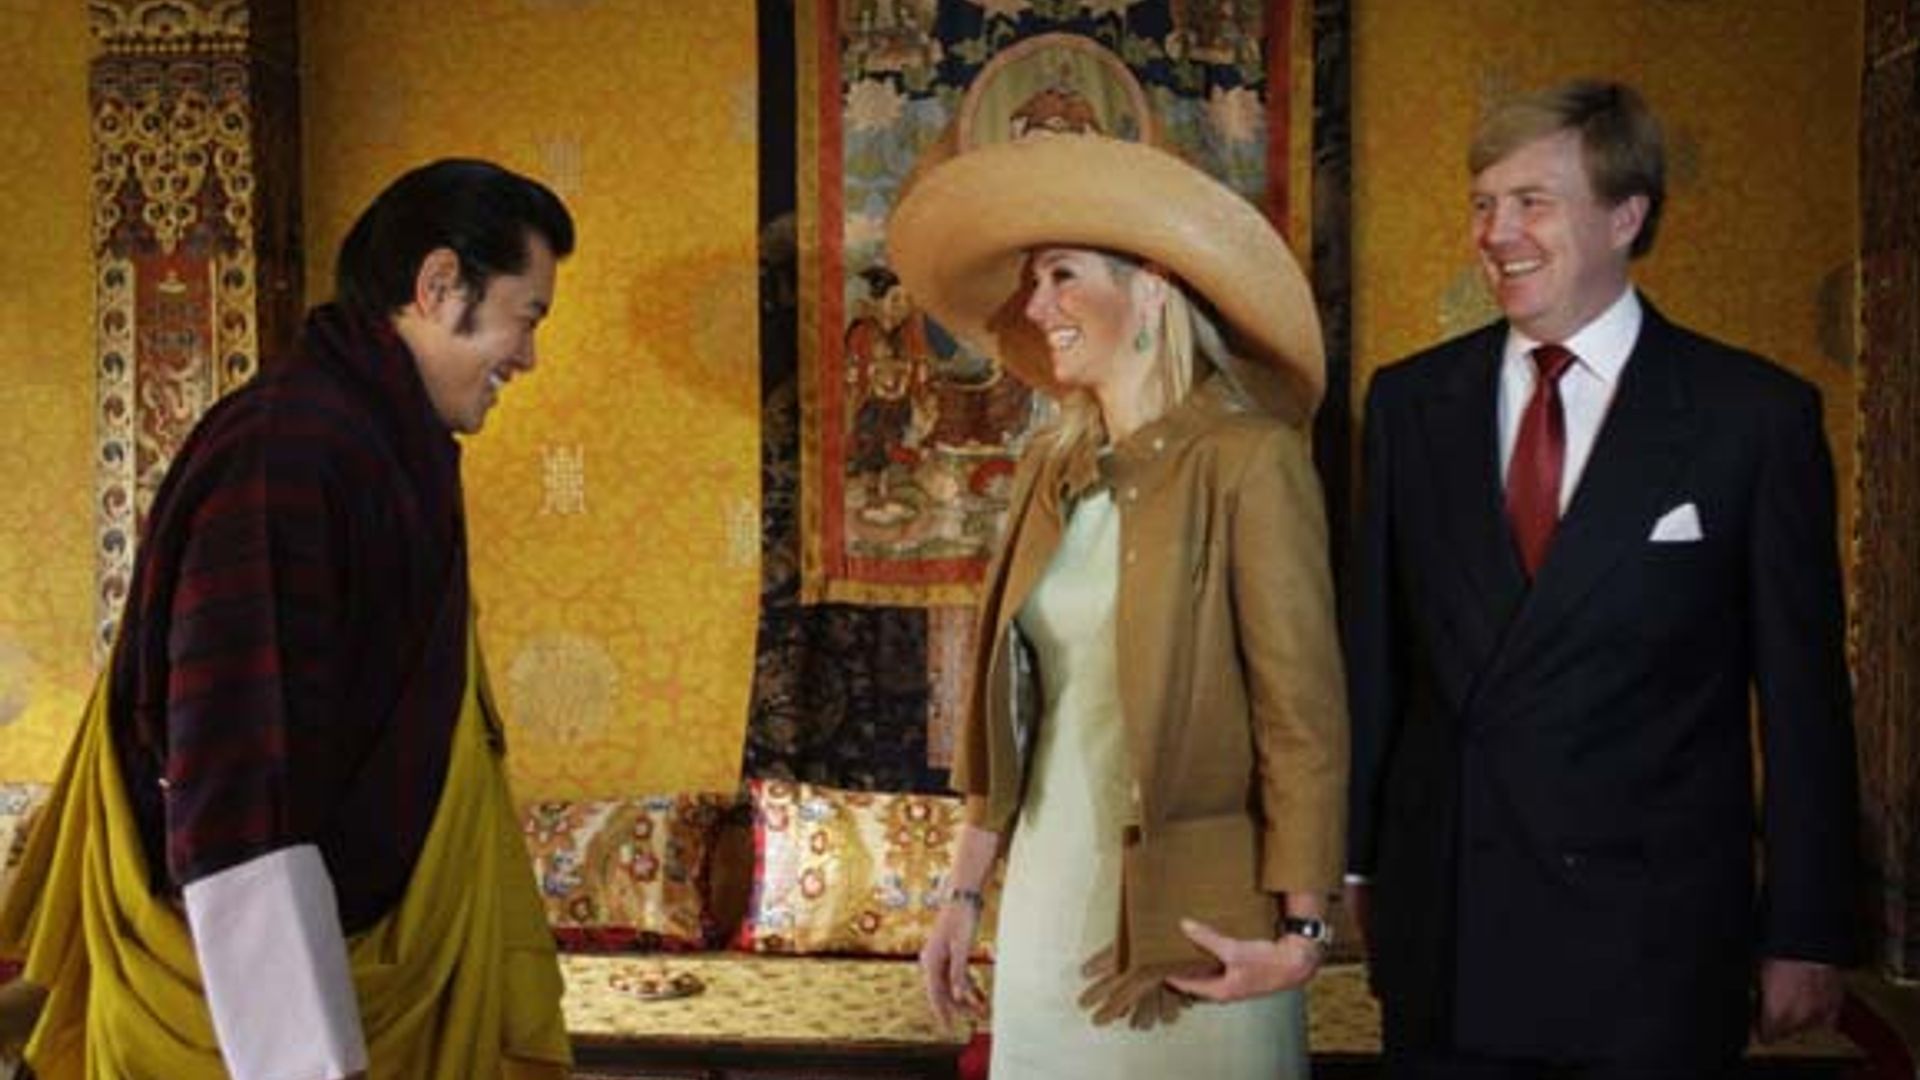 King of Bhutan welcomes Willem-Alexander and Maxima to his homeland